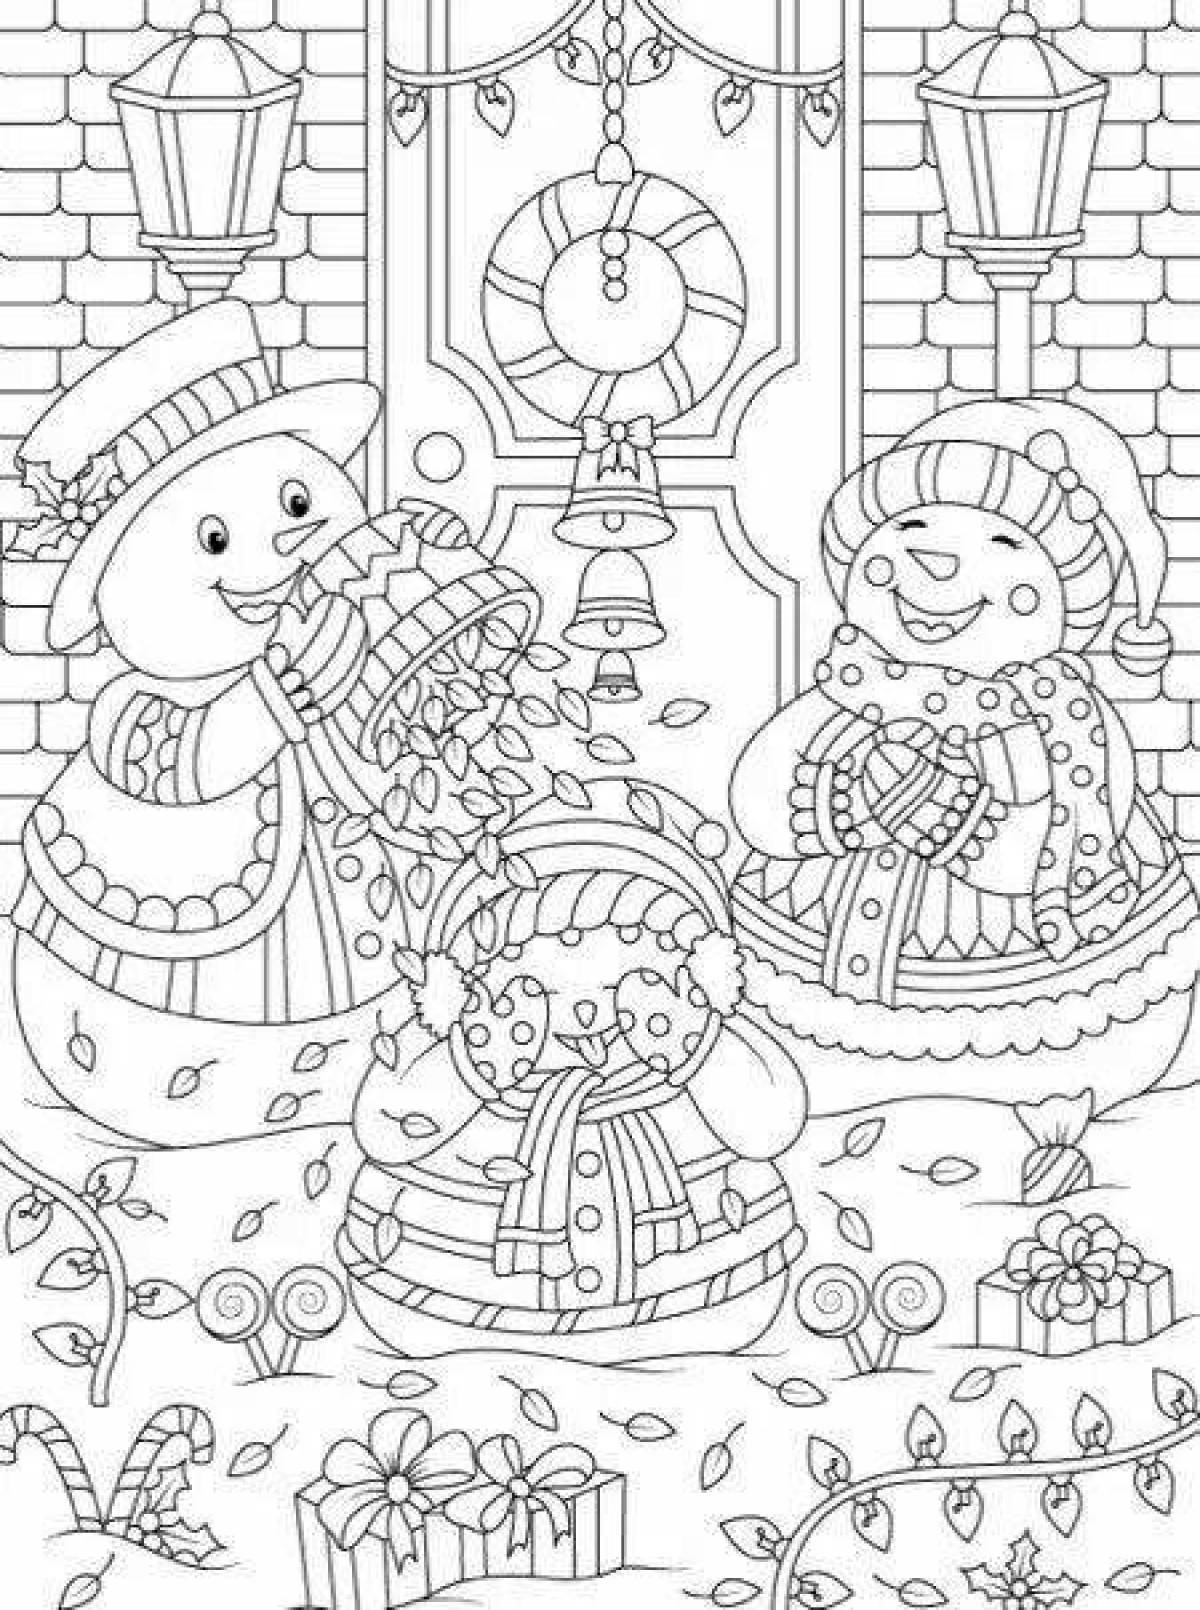 Colorful snowman antistress coloring book